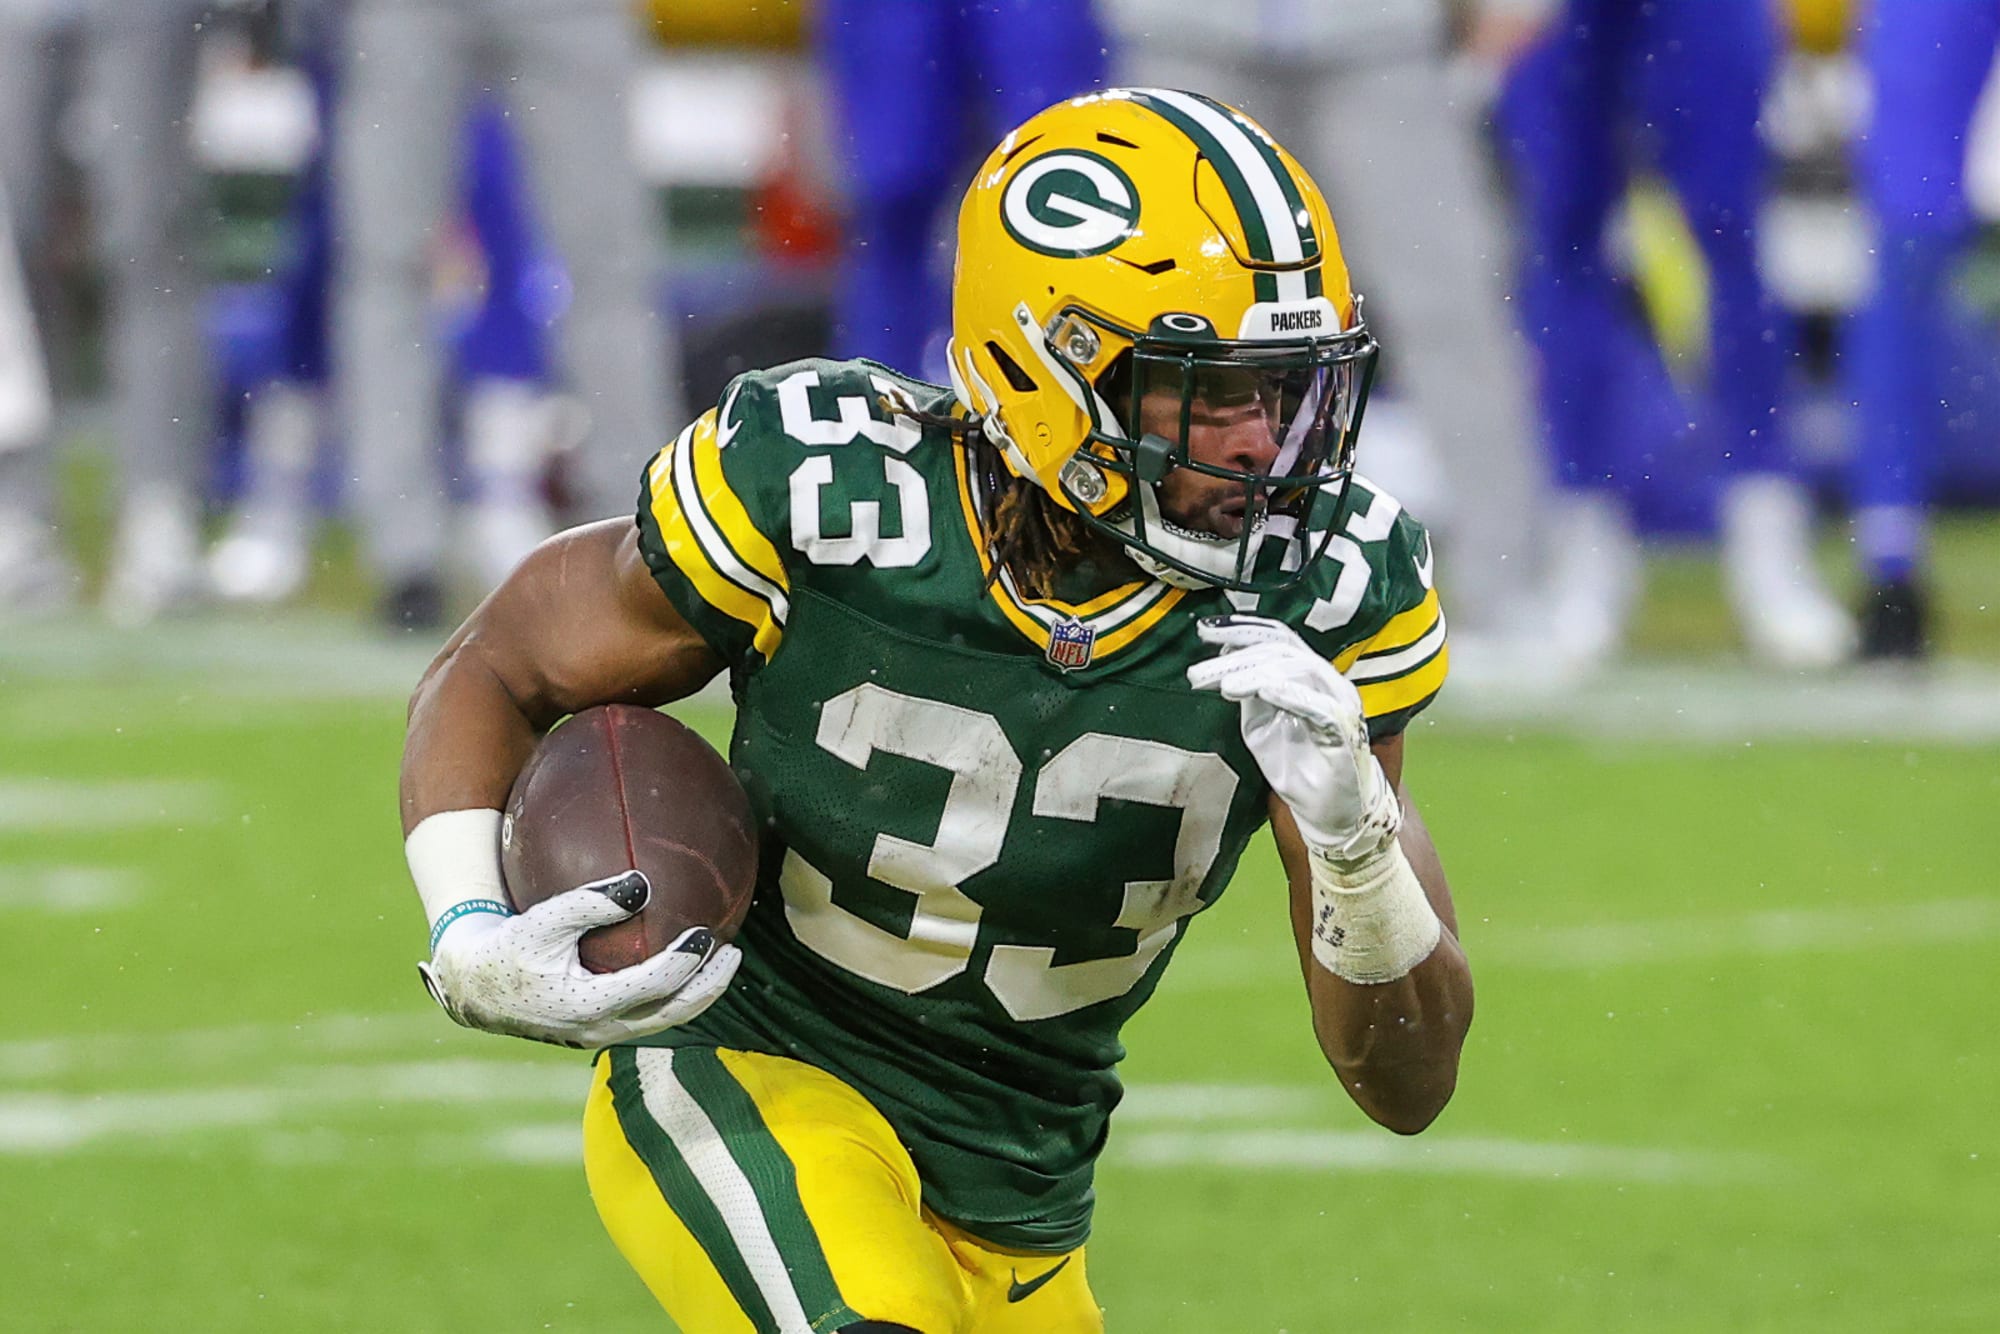 Aaron Jones has had over 1,000 yards from scrimmage in each of the past three seasons